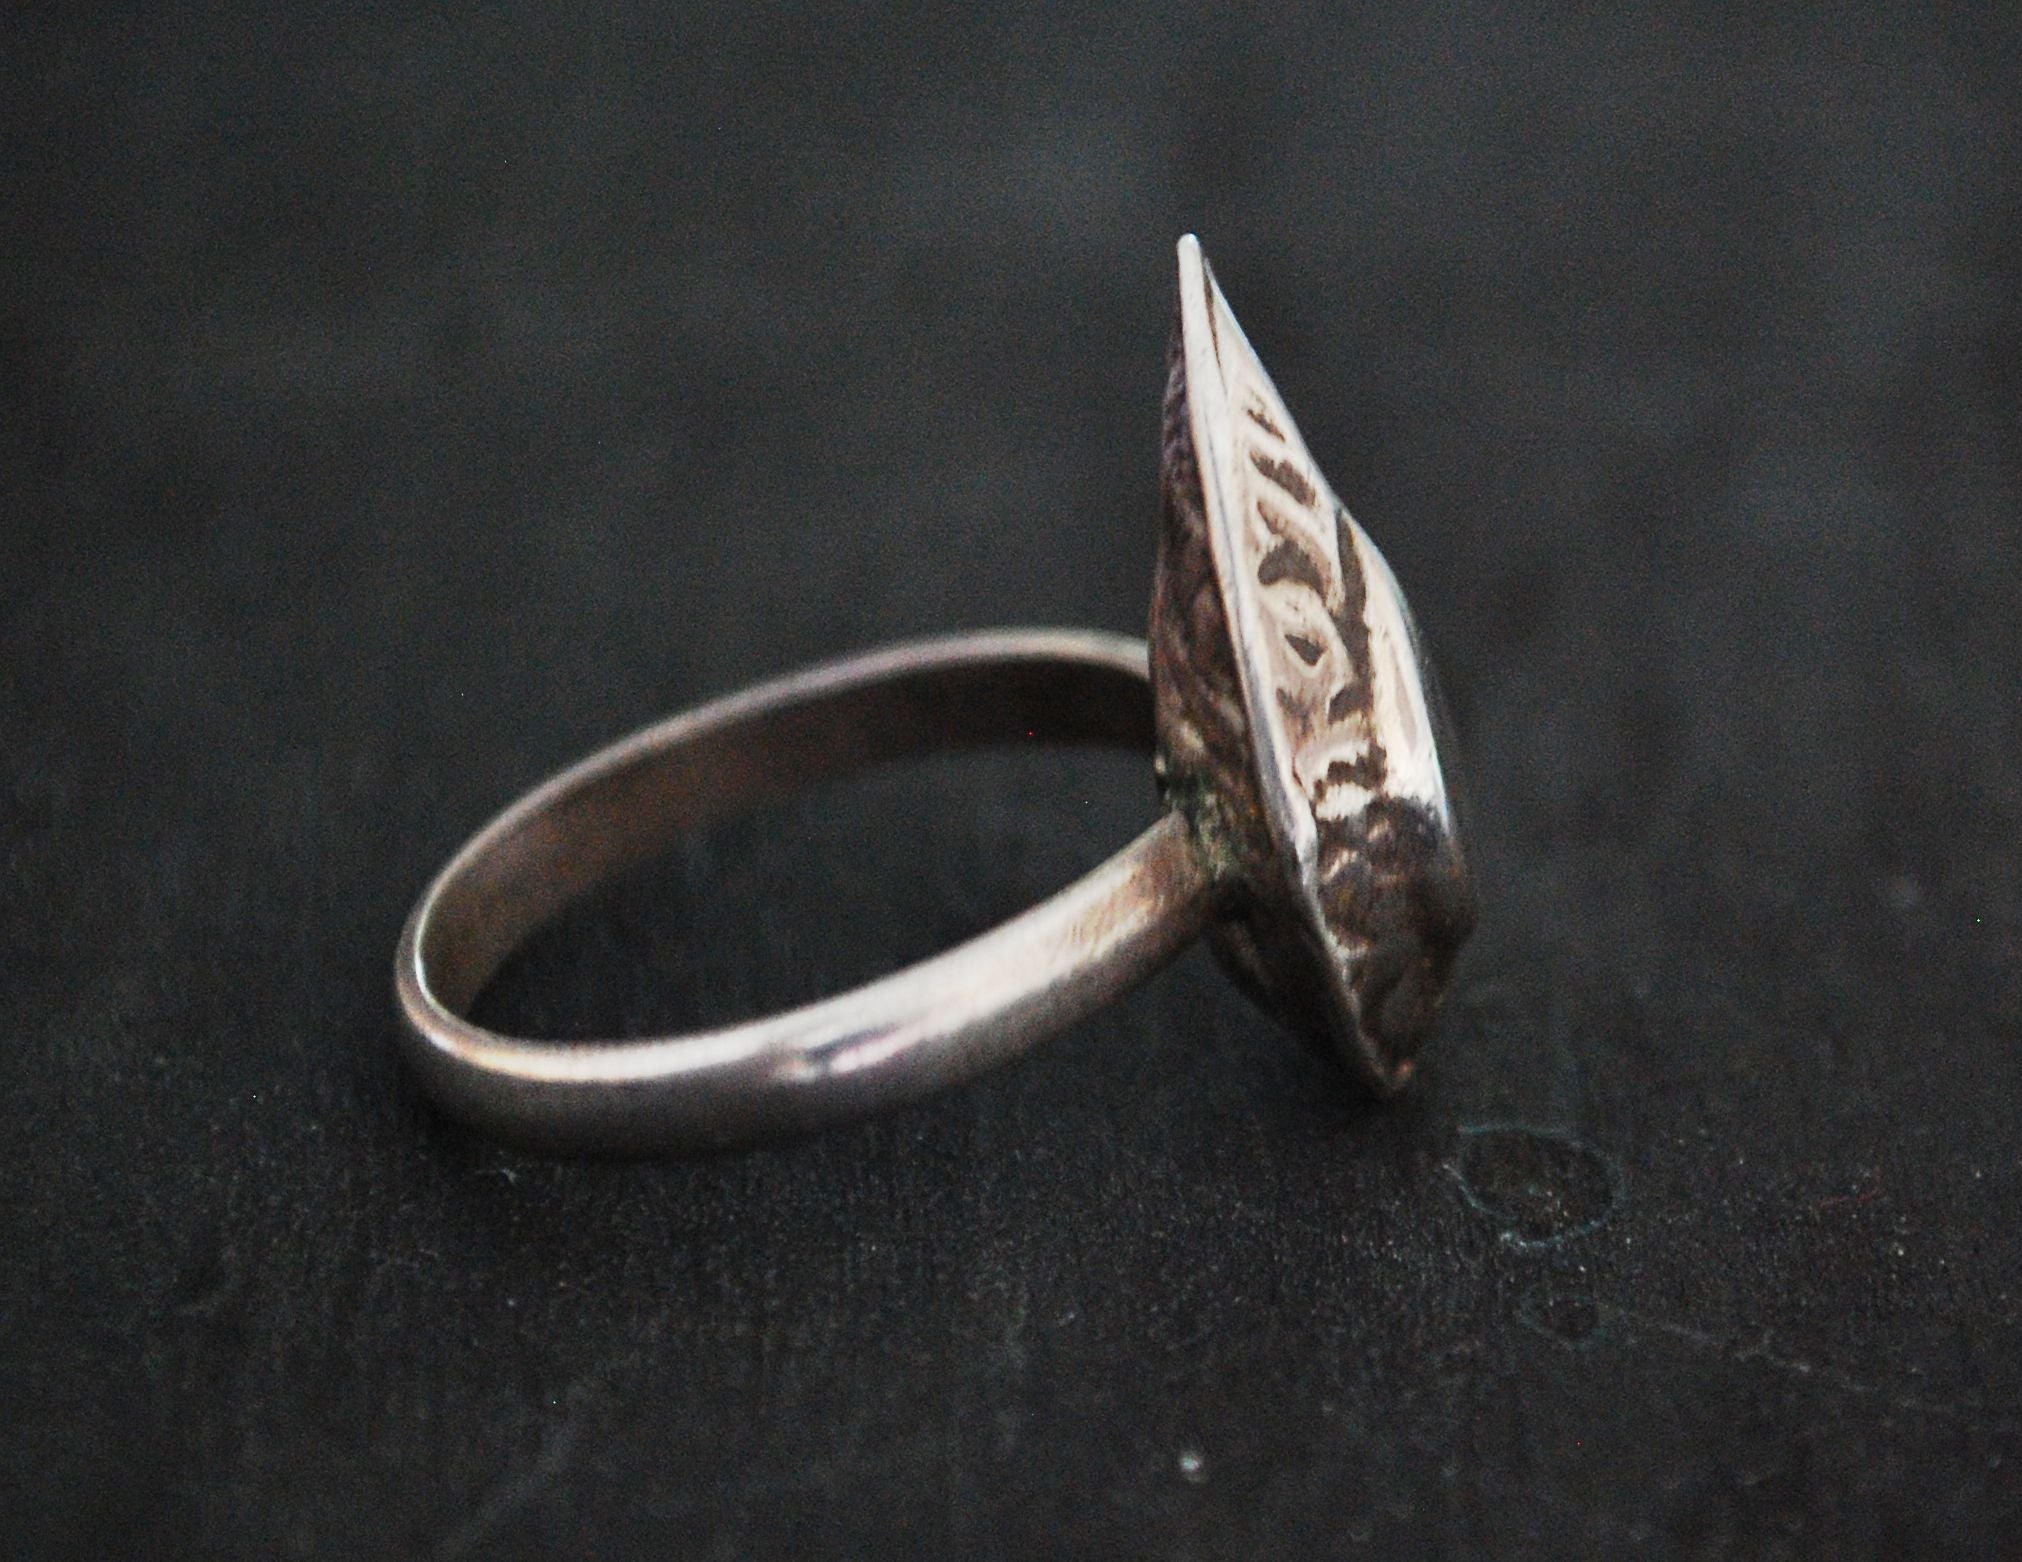 Tribal Afghani Silver Ring - Size 9.5